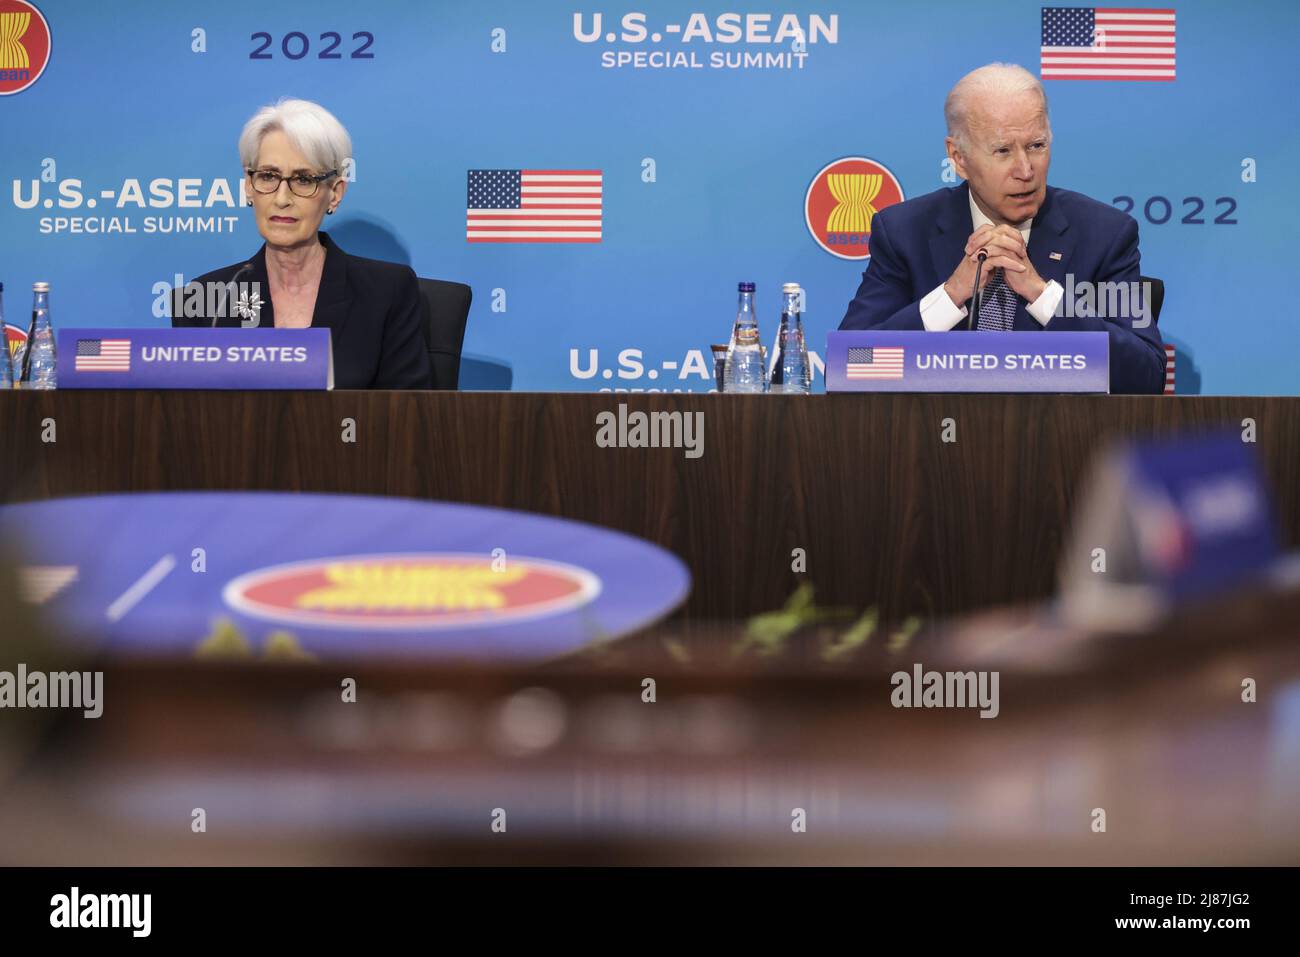 Washington DC, USA. 13th May, 2022. Washington DC, USA. 13th May, 2022. United States Deputy Secretary of State Wendy R. Sherman and President Joe Biden attend the U.S.-ASEAN relations and strengthen ASEAN's central role in delivering sustainable solutions to the region's most pressing challenges held at the Department of State, Harry S. Truman Building in Washington, DC on Friday, May 13, 2022. Photo by Oliver Contreras/UPI Credit: UPI/Alamy Live News Credit: UPI/Alamy Live News Stock Photo